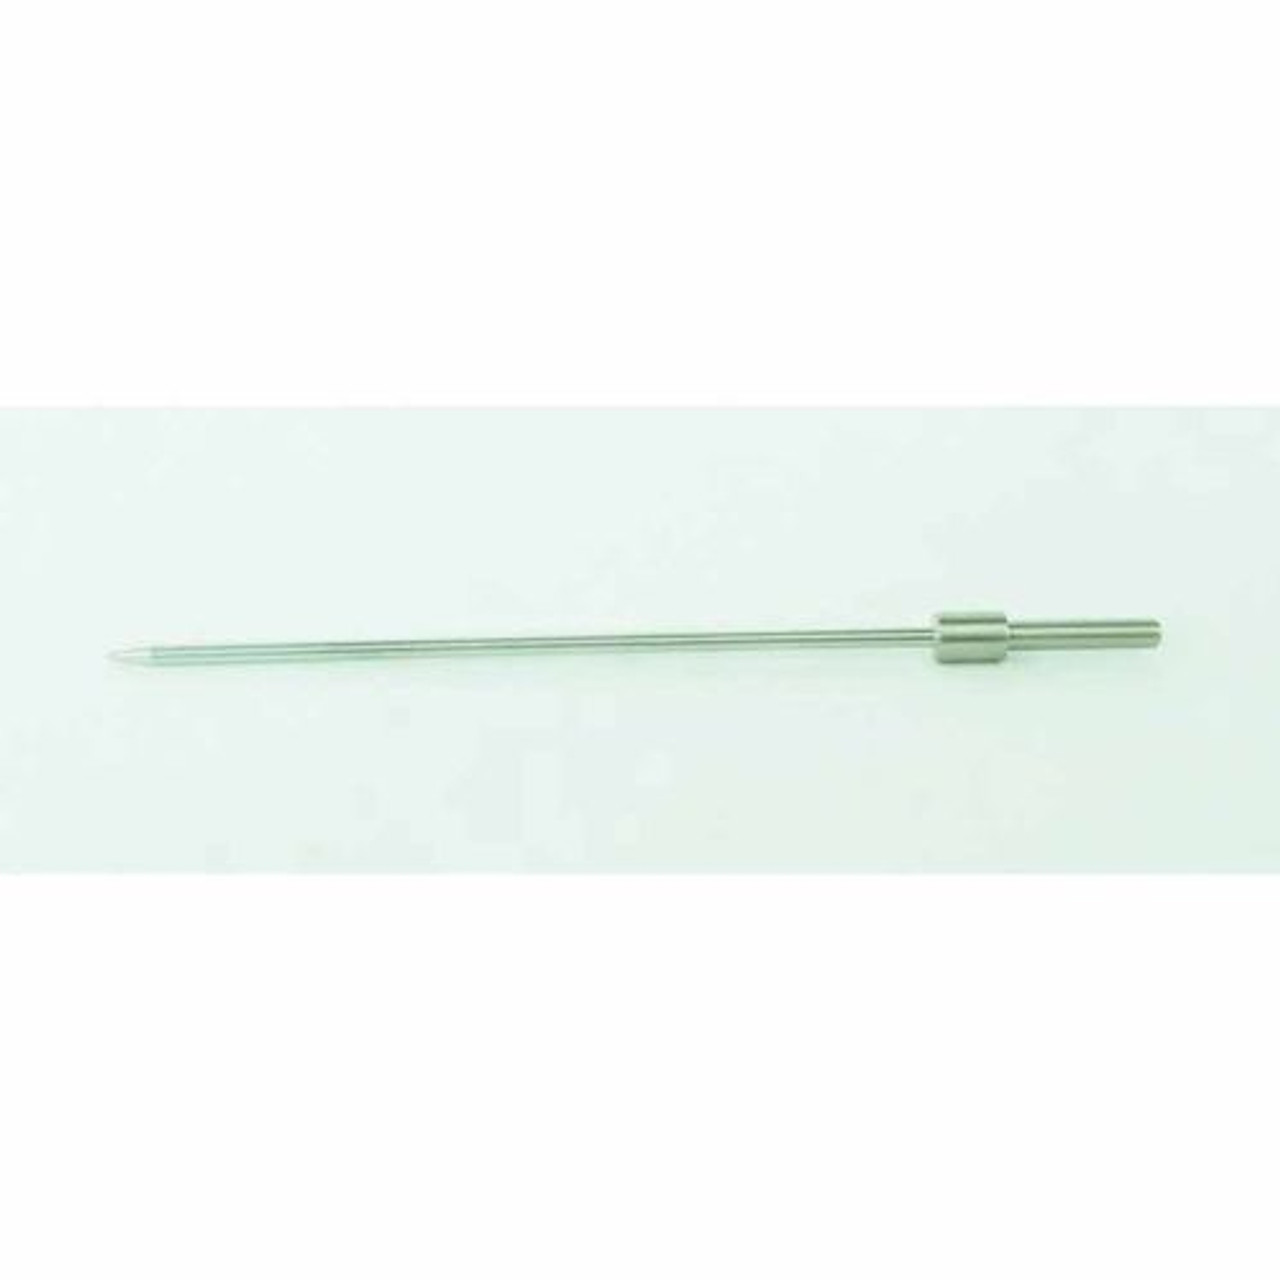 DeVilbiss 47-3600 Needle Assembly 36